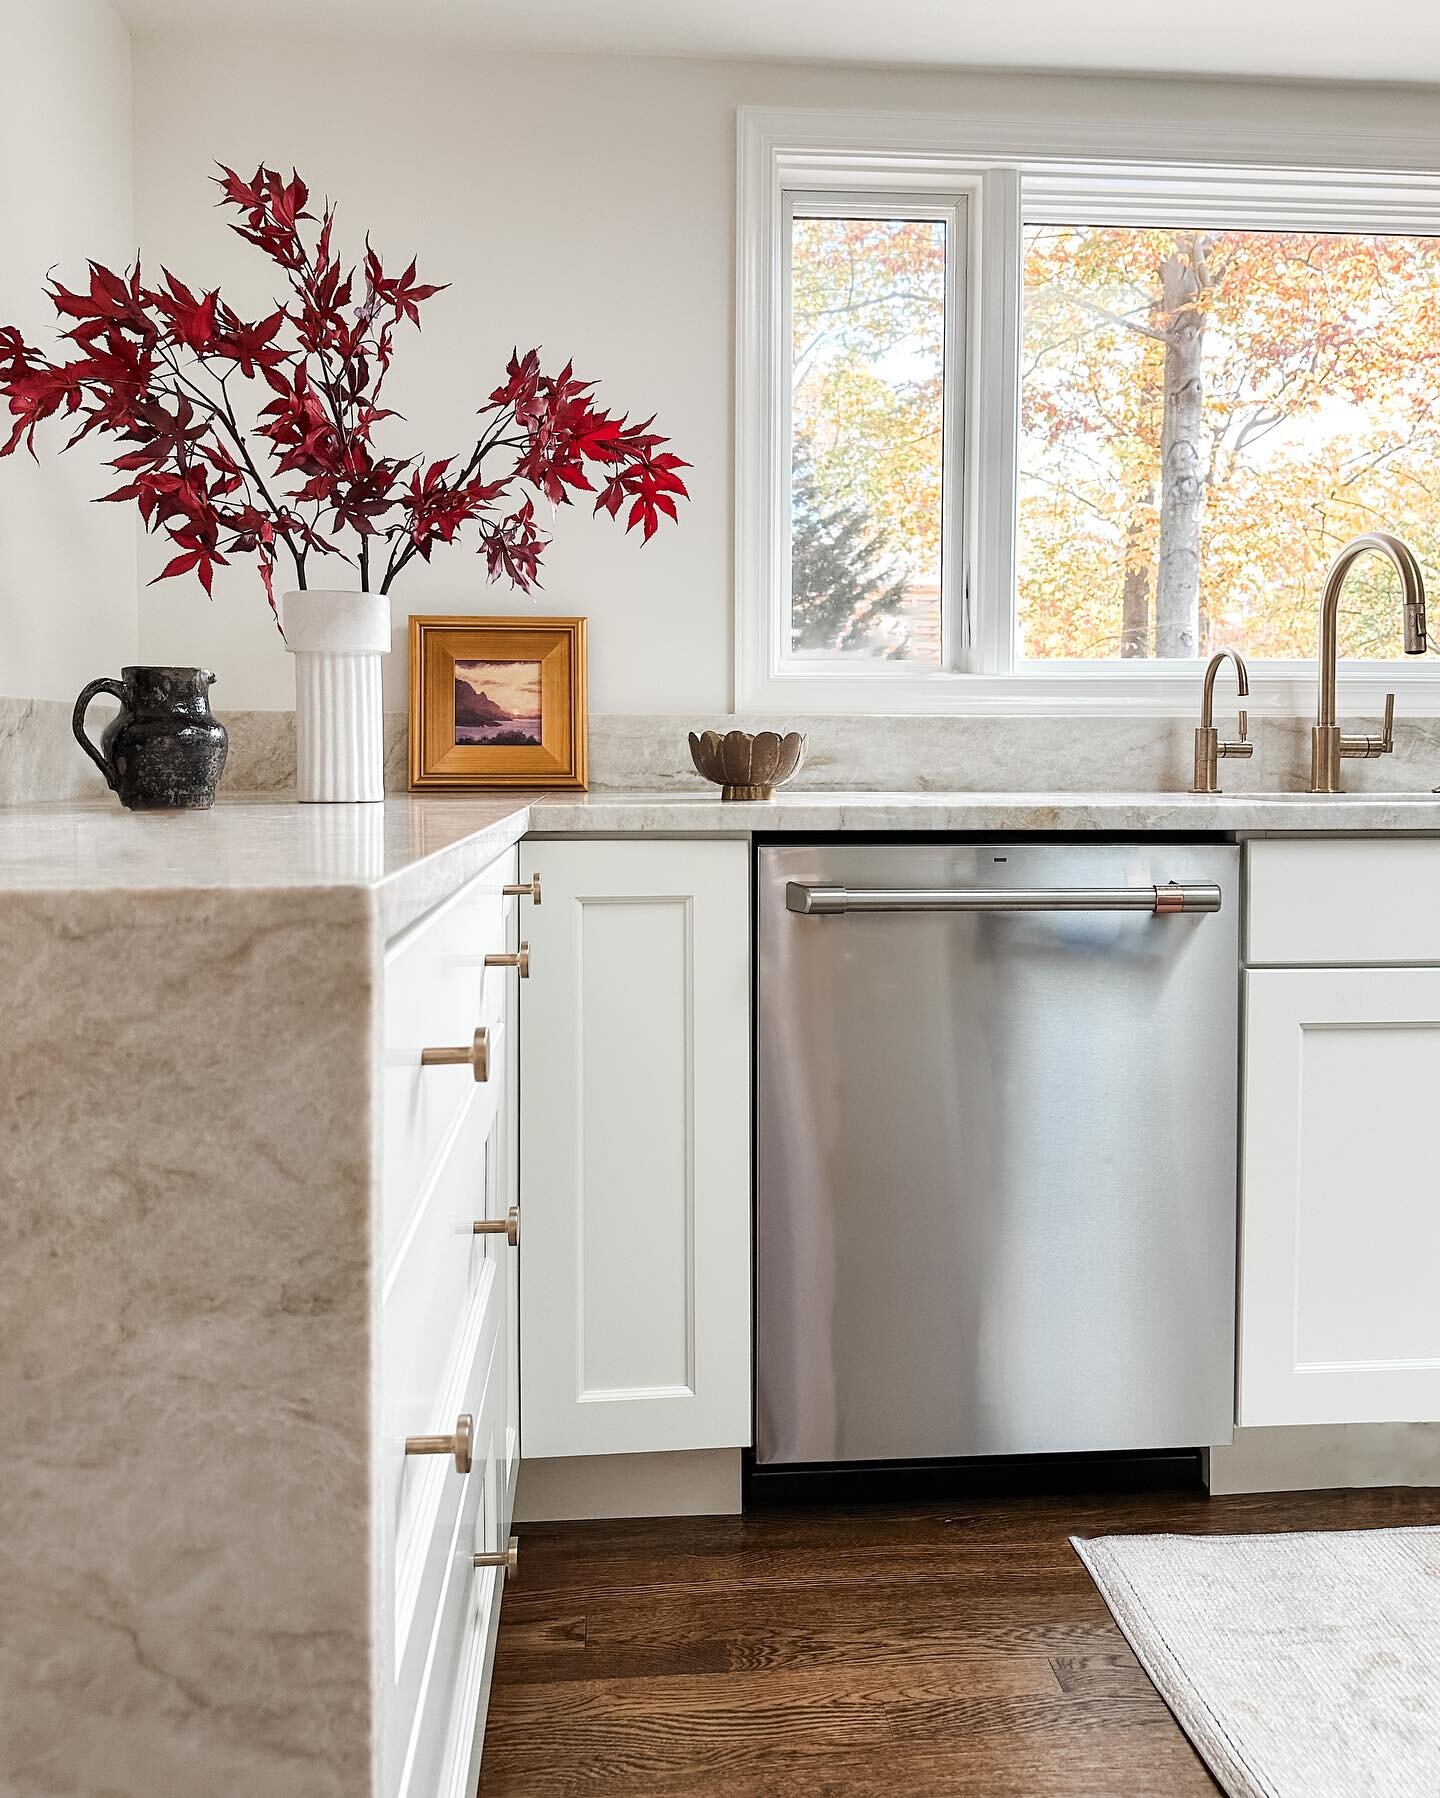 A fall story :: The before + after

#darabeitlerinteriors 
#warmkitchen 
#kitchen
#transformation 
#countertops 
#style 
#bethesda